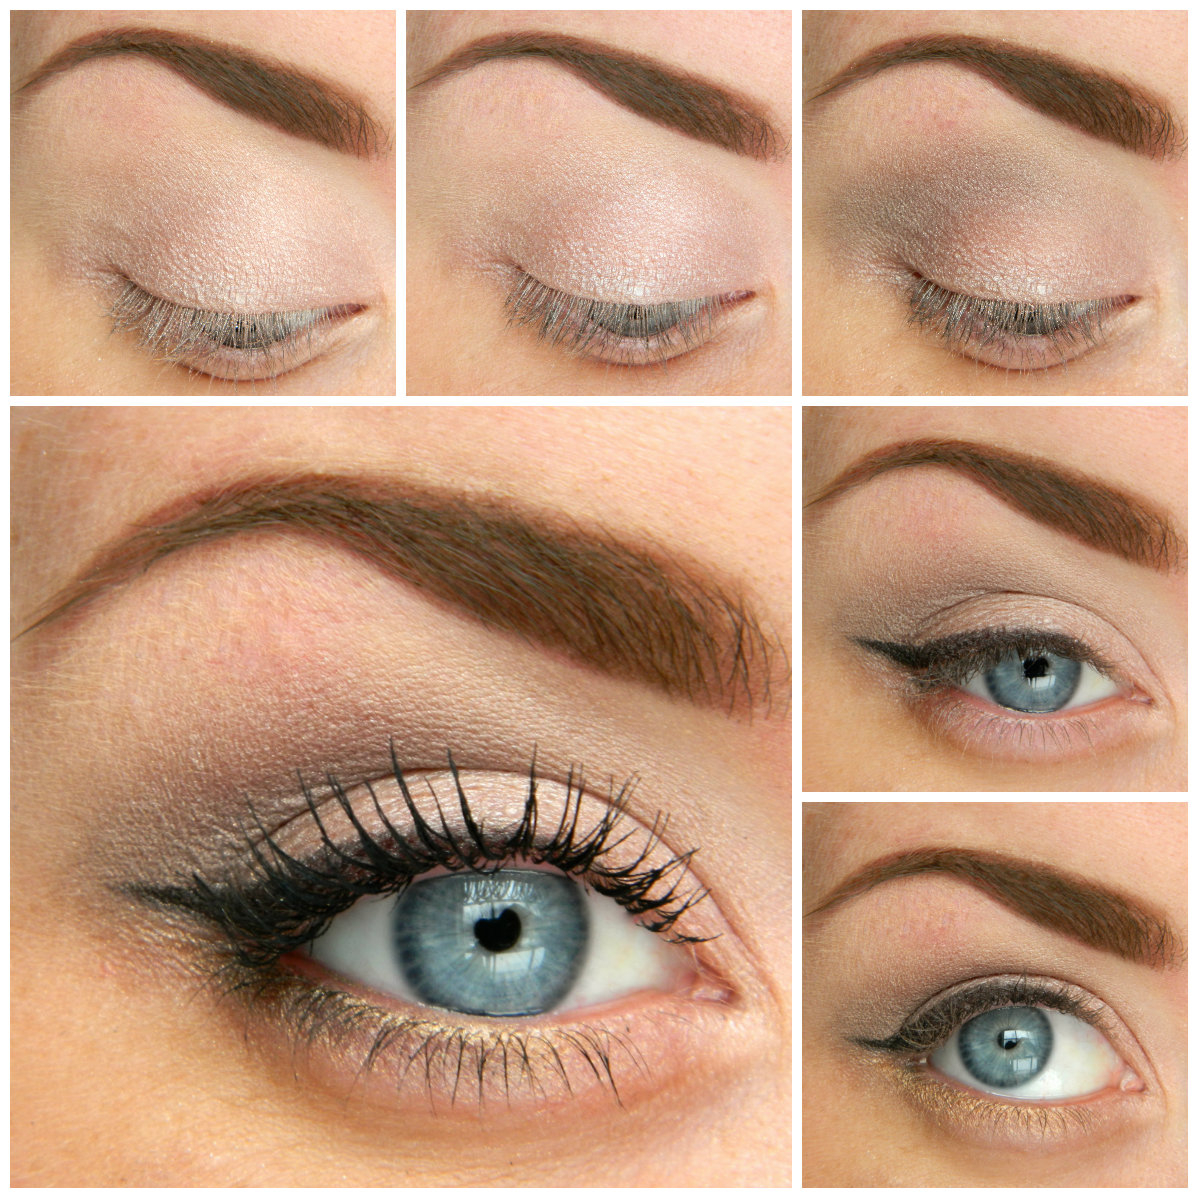 Best Way To Do Makeup For Blue Eyes 5 Ways To Make Blue Eyes Pop With Proper Eye Makeup Her Style Code